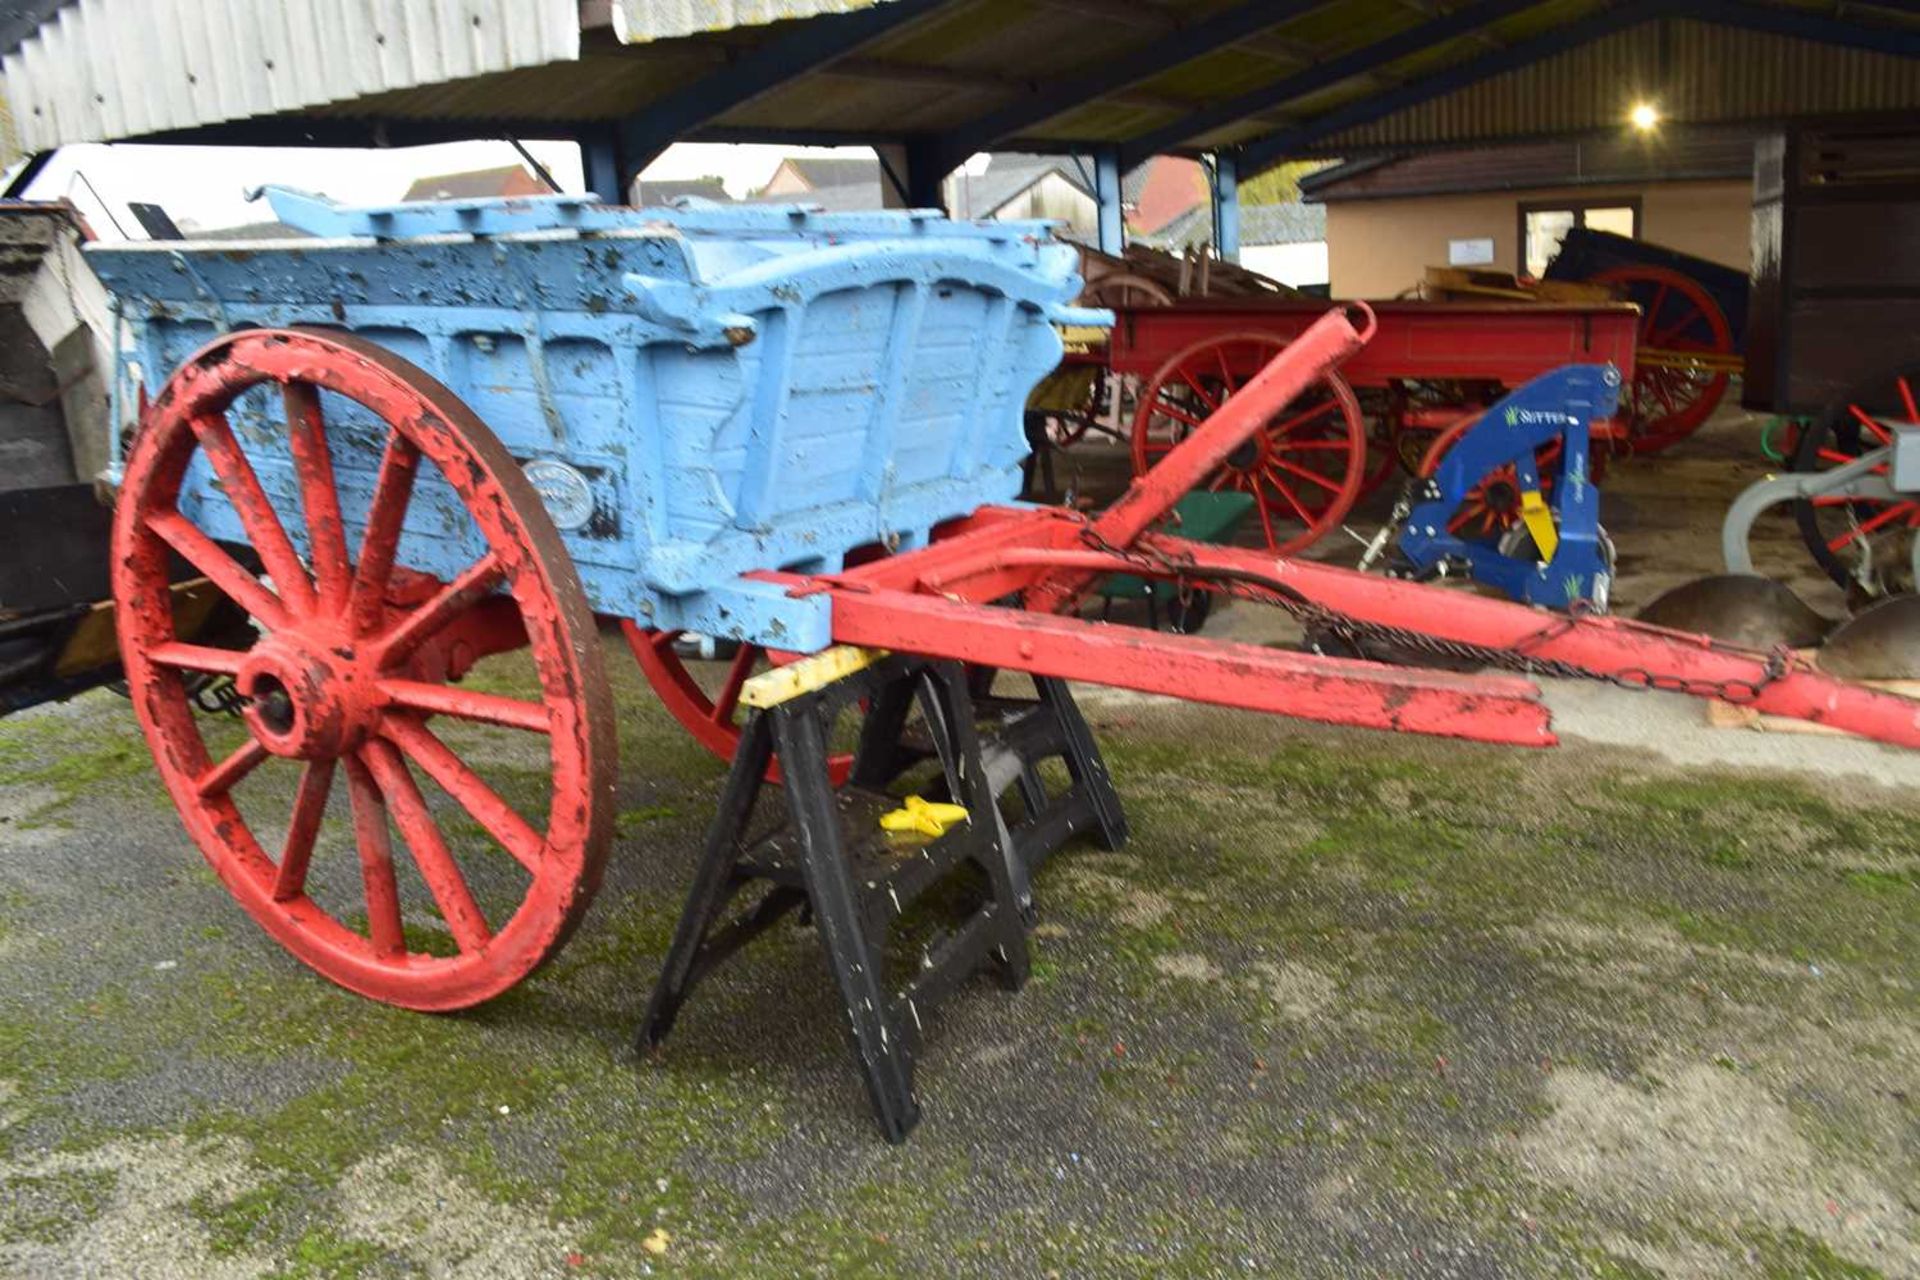 Single axle farm cart with blue and red painted body, (significantly deteriorated condition) - Image 2 of 4